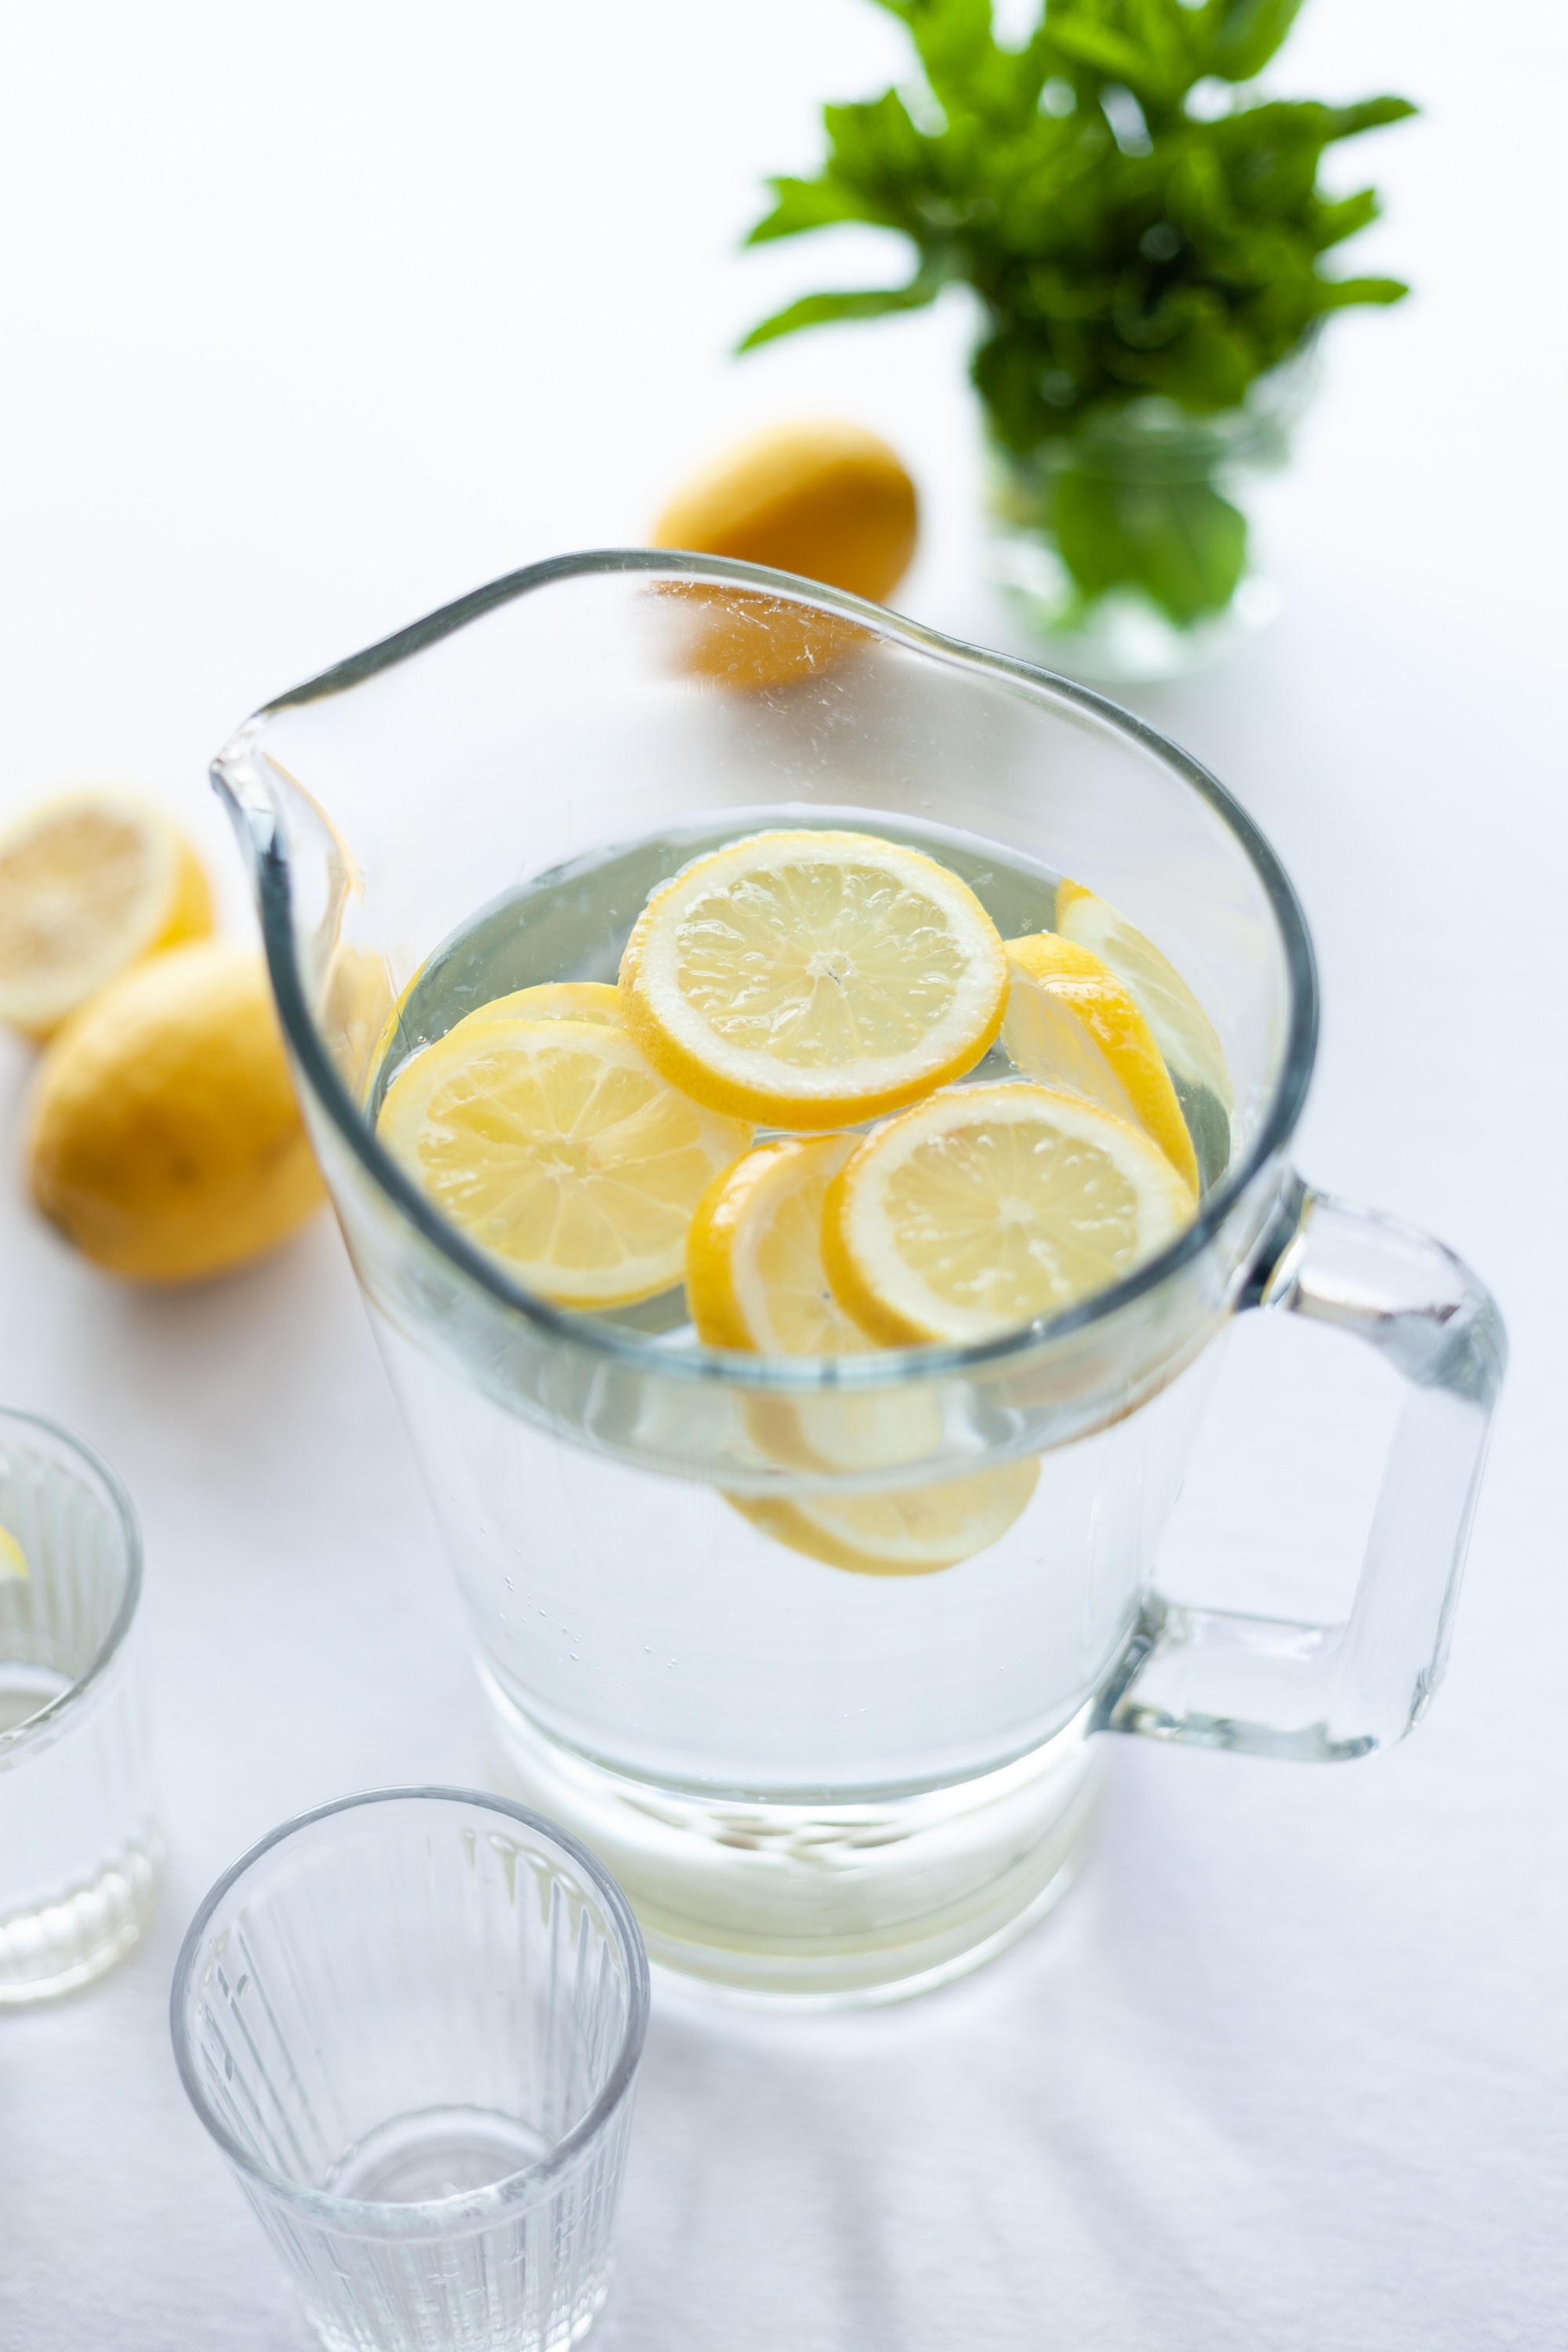 Five Tips to Stay Hydrated